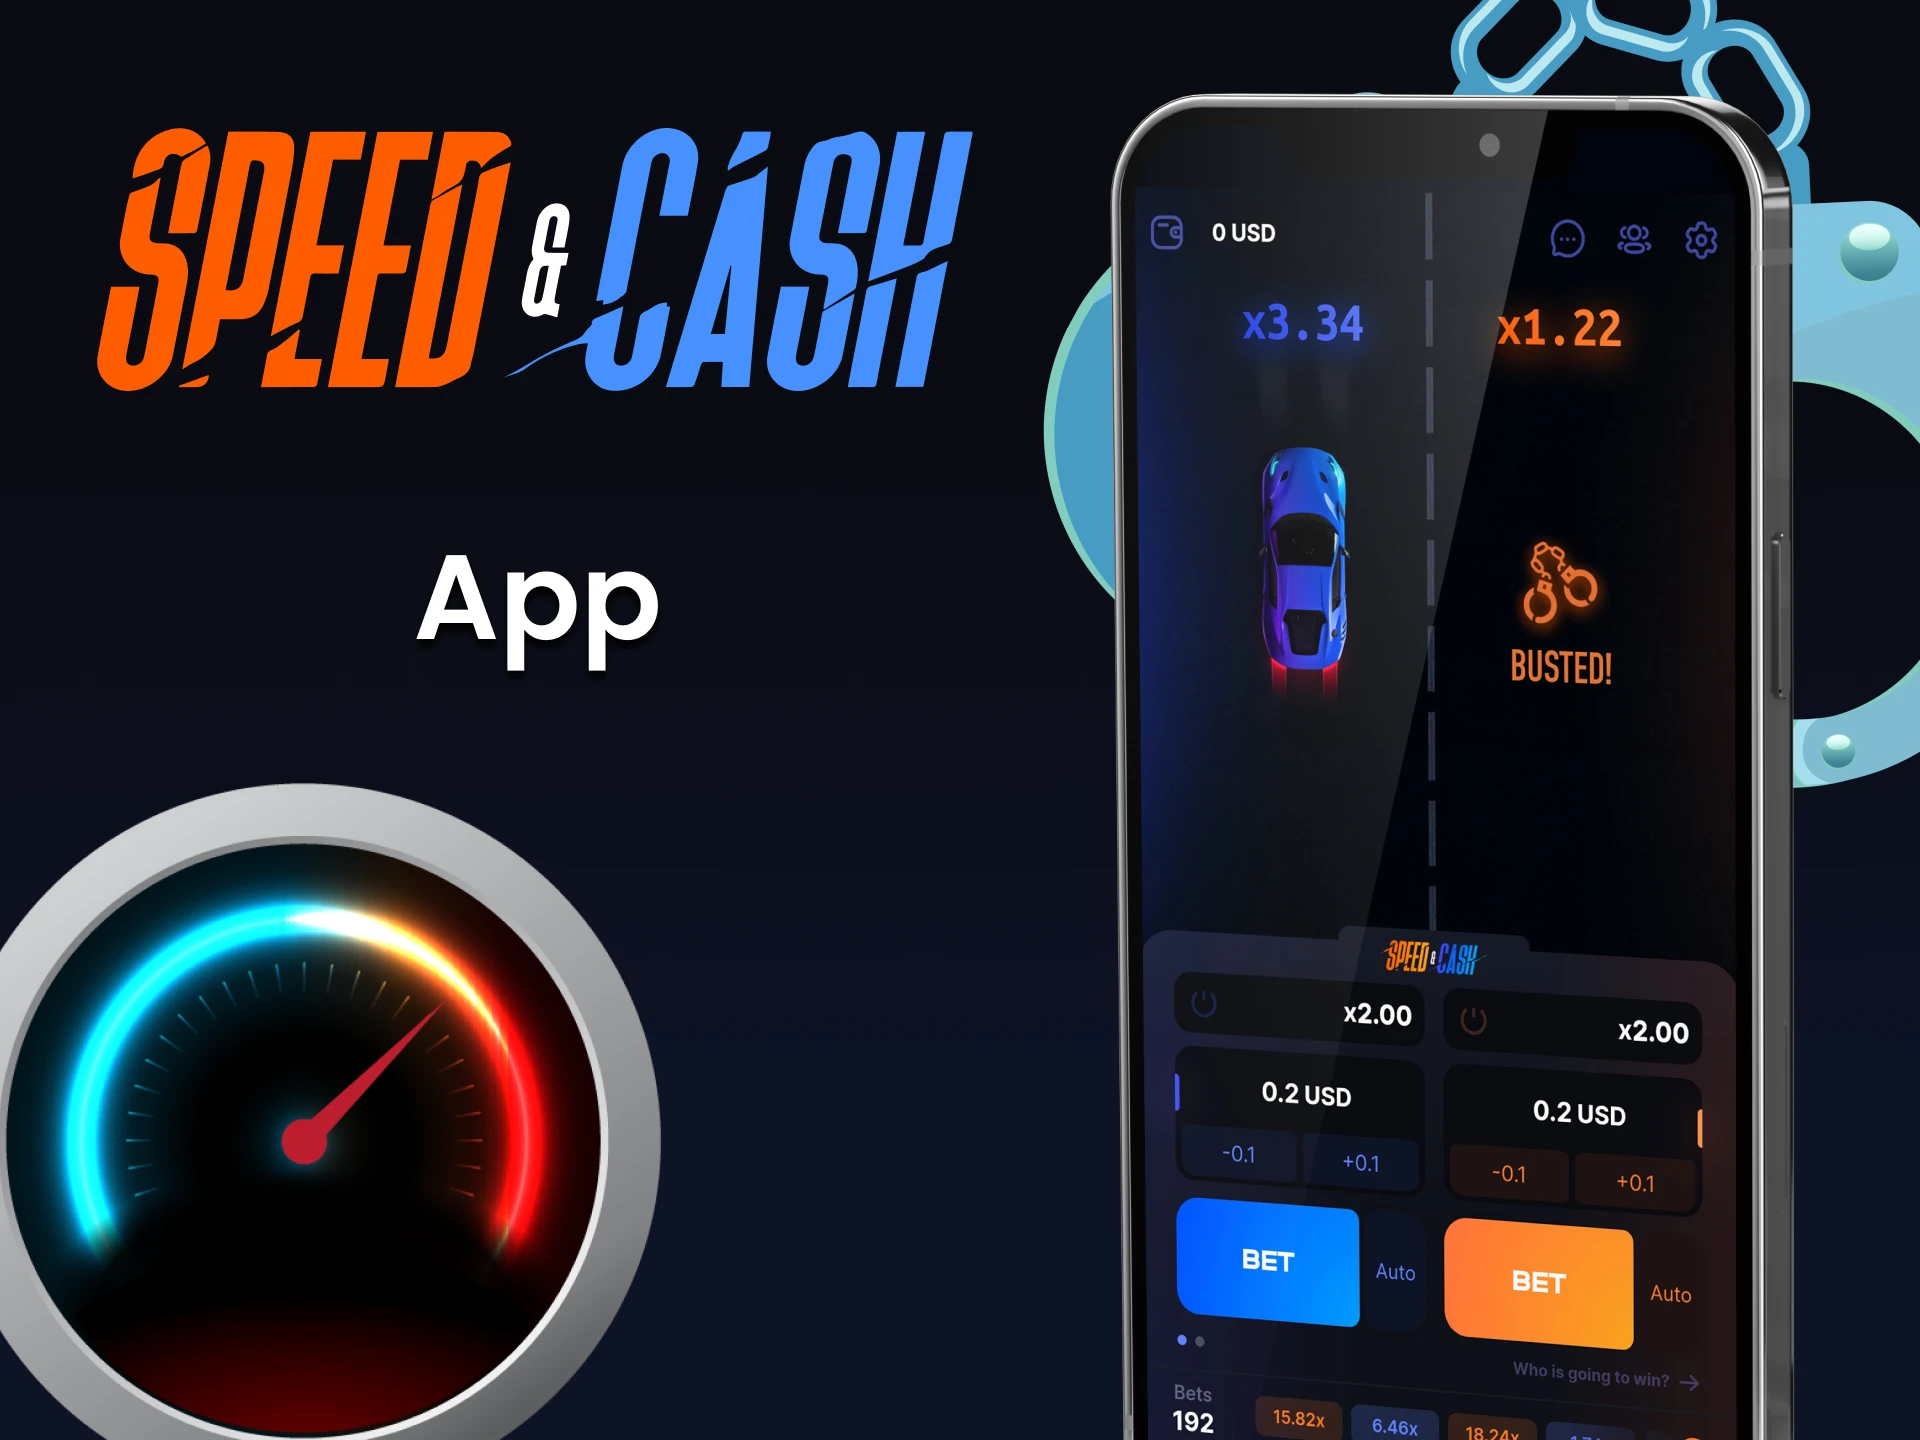 You can play Speed&Cash through your phone.